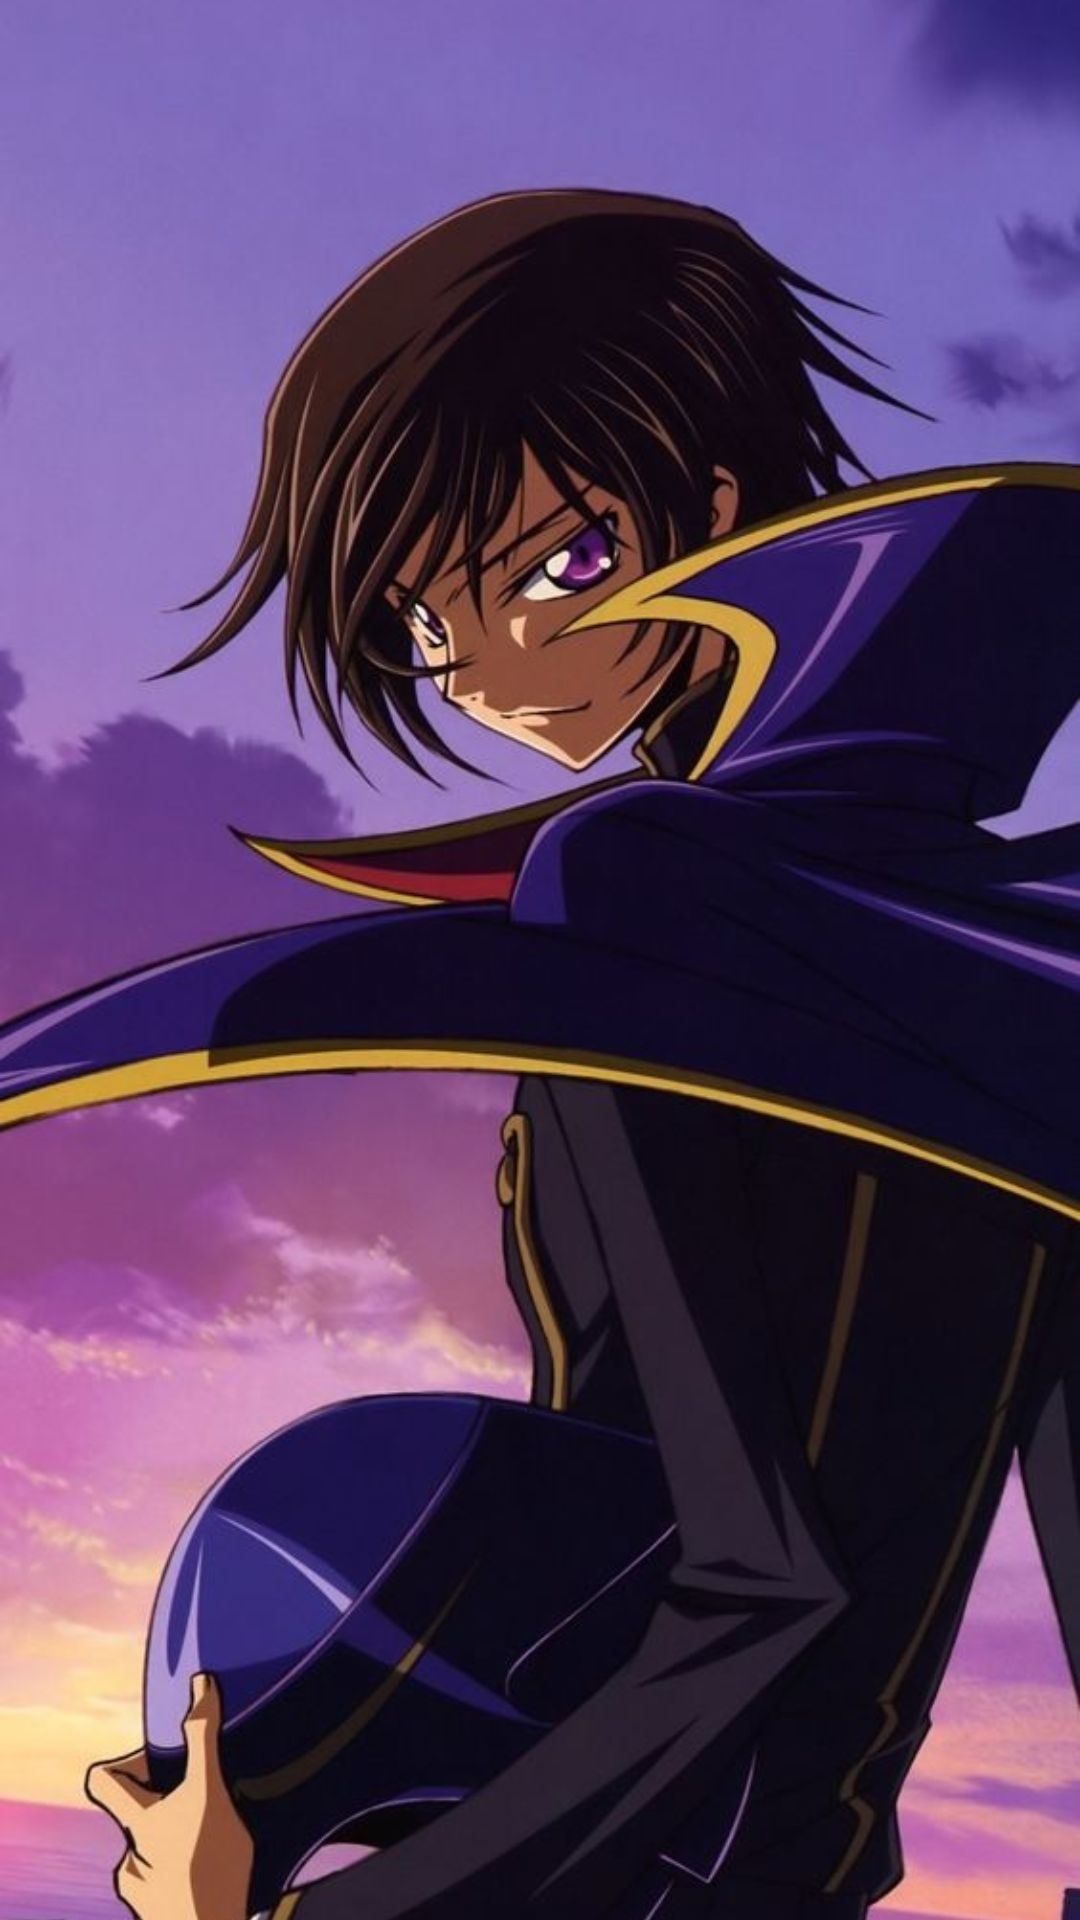 Code Geass: Lelouch of the Rebellion, Political intrigue, Mecha battles, Complex characters, 1080x1920 Full HD Phone